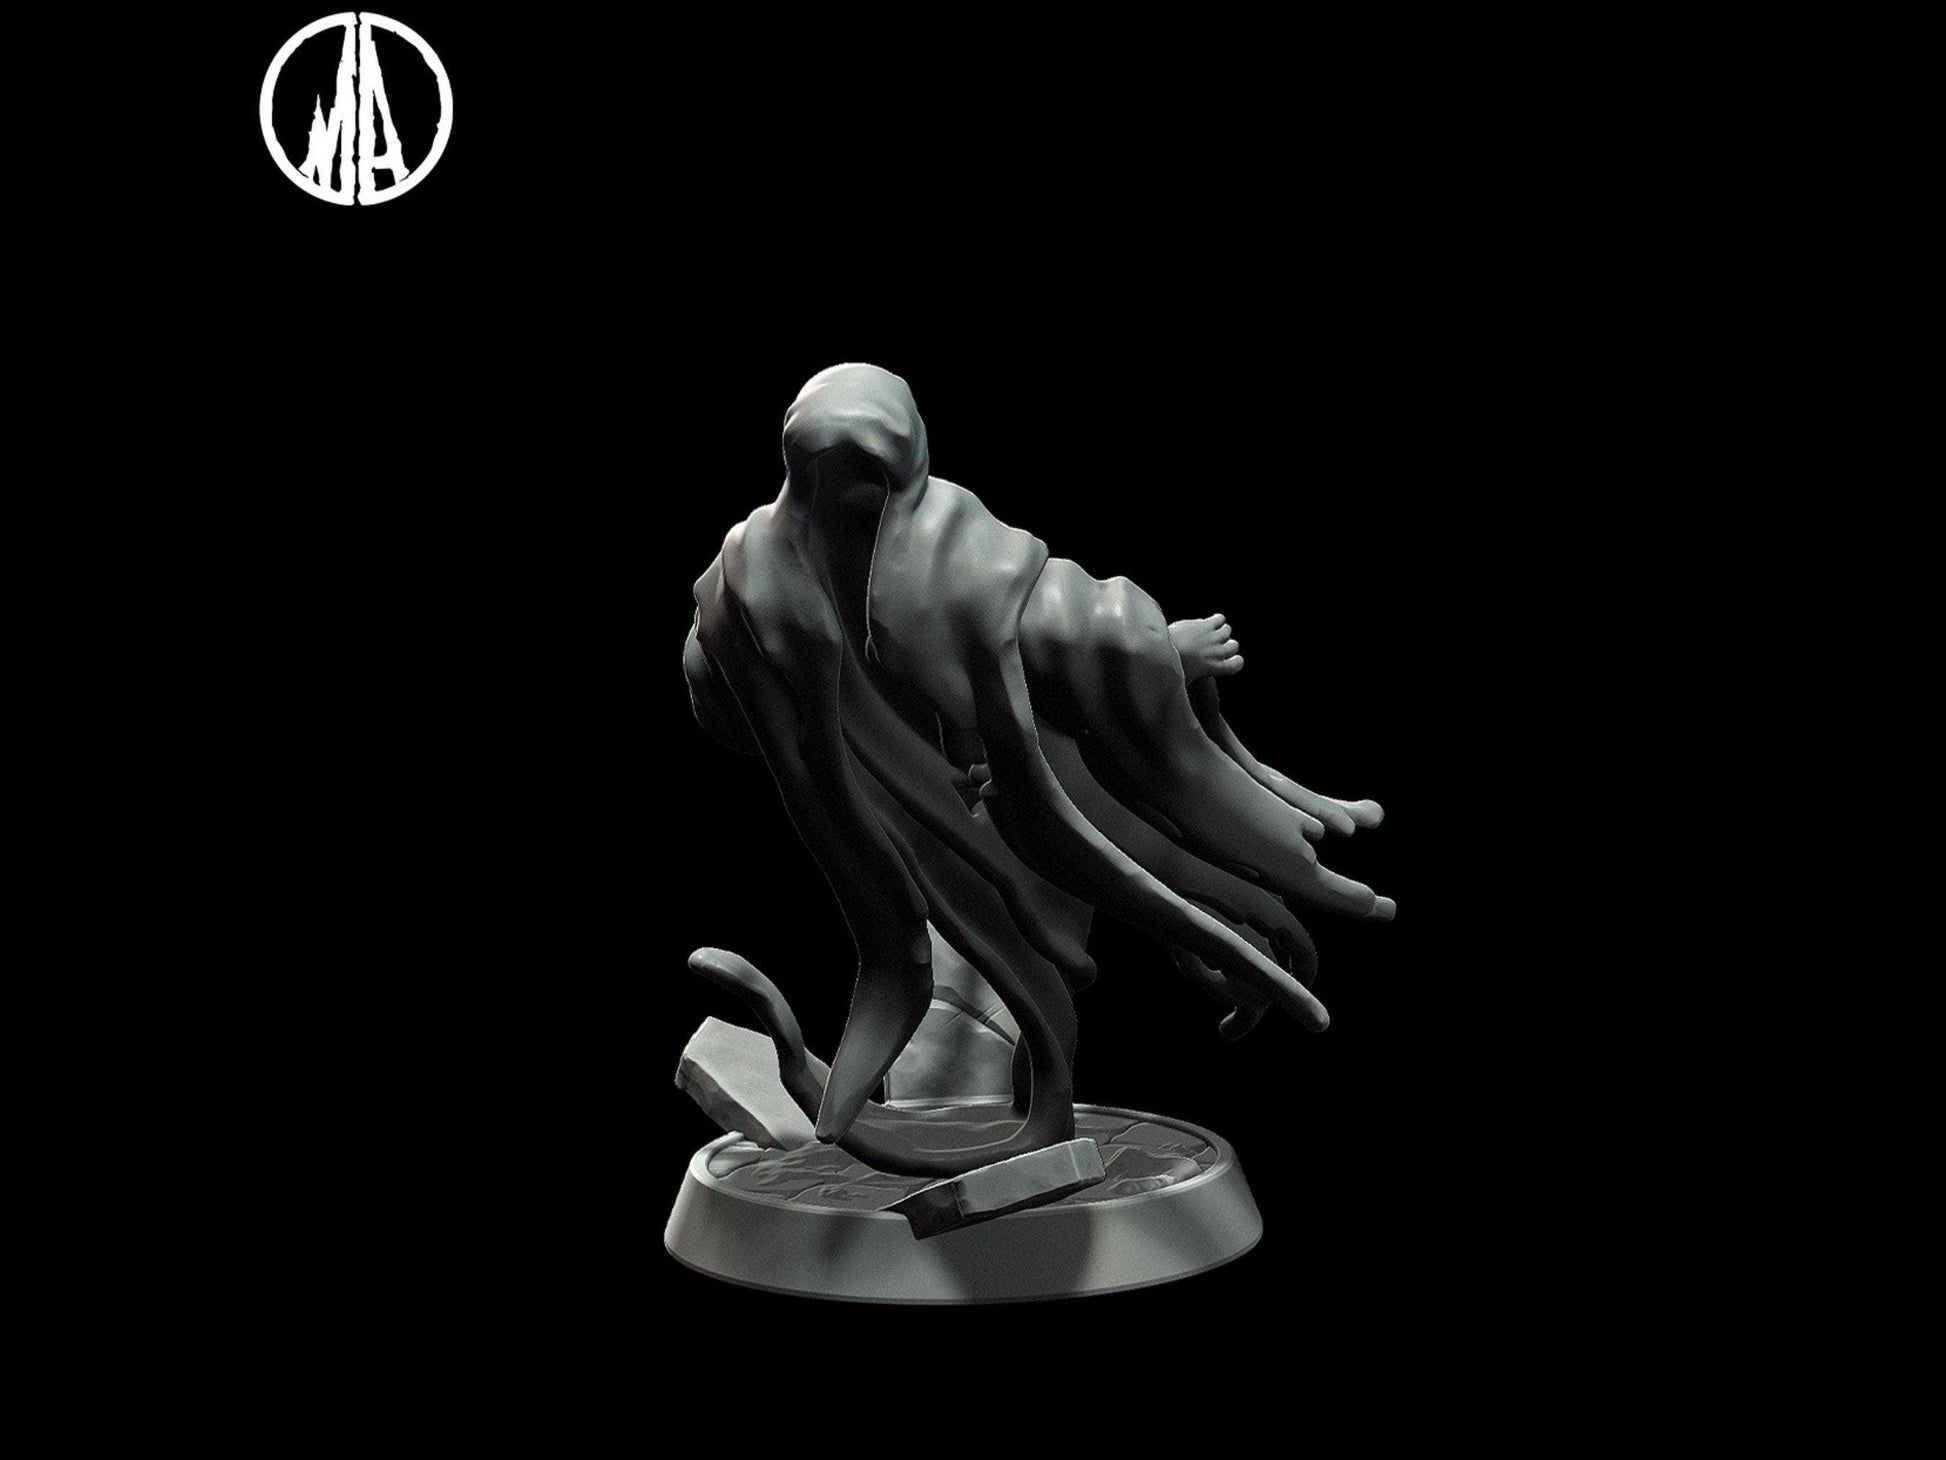 Ghost Miniature ghost figurine - 5 Poses - 28mm scale Tabletop gaming DnD Miniature Dungeons and Dragons,dnd 5e ghost figurine - Plague Miniatures shop for DnD Miniatures